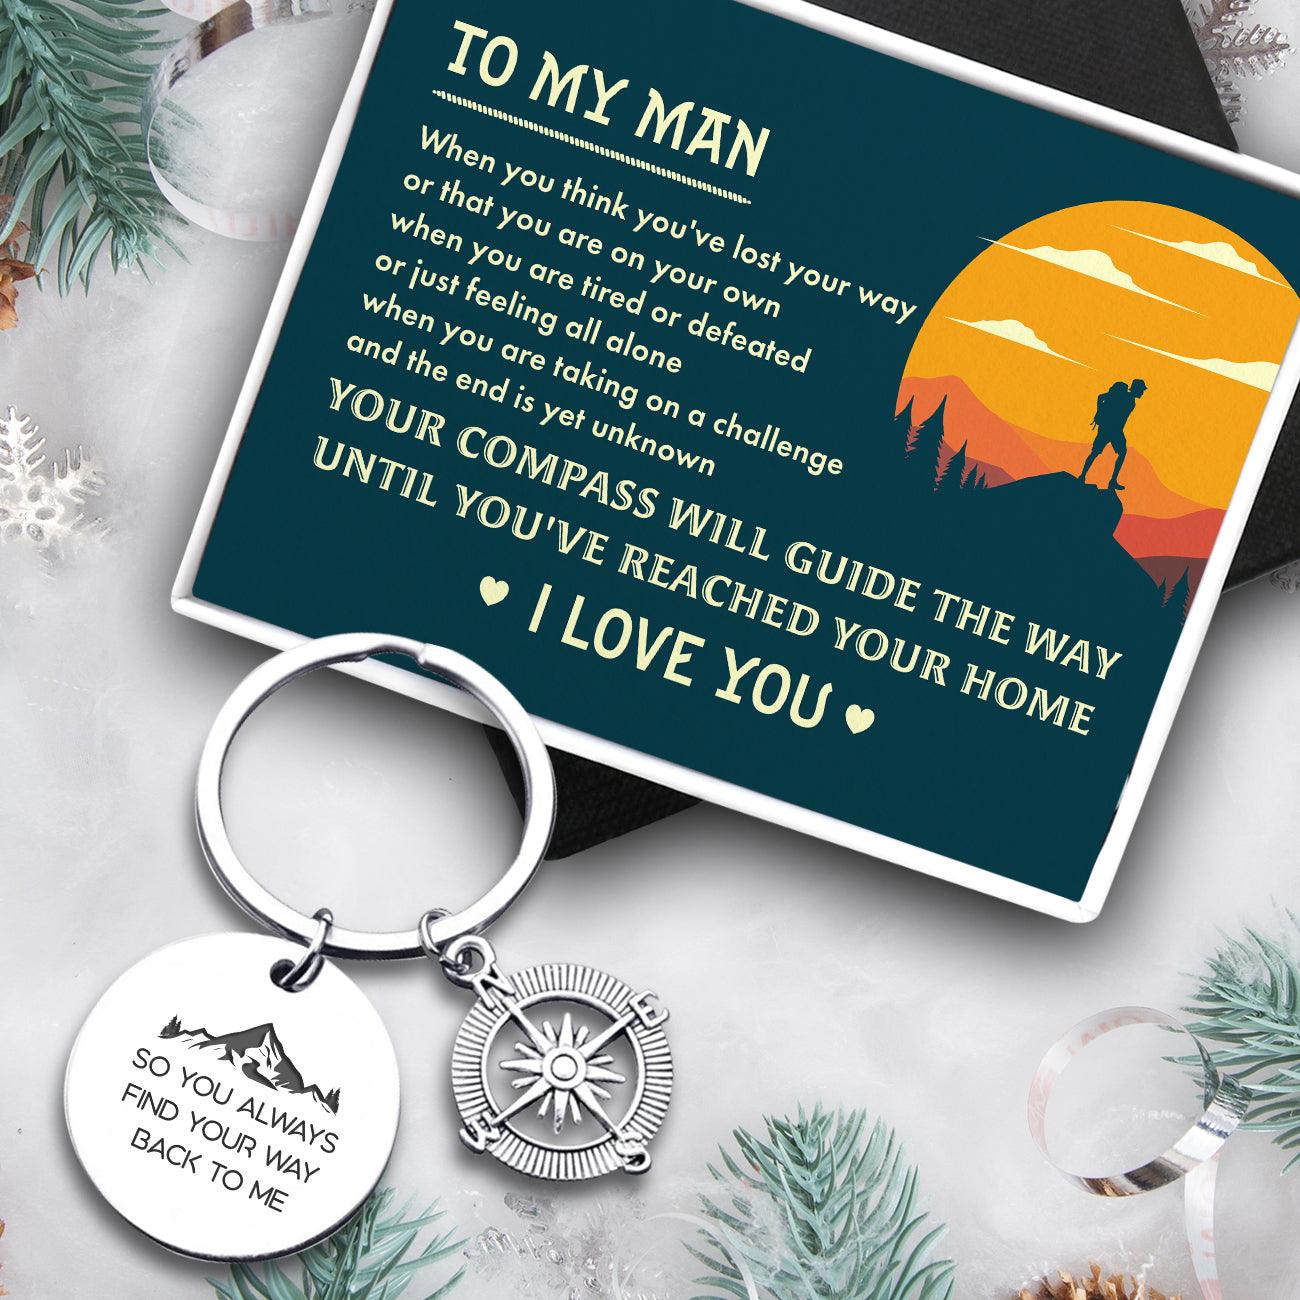 Compass Keychain - Travel - To My Man - So You Always Find Your Way Back To Me - Augkw26007 - Gifts Holder